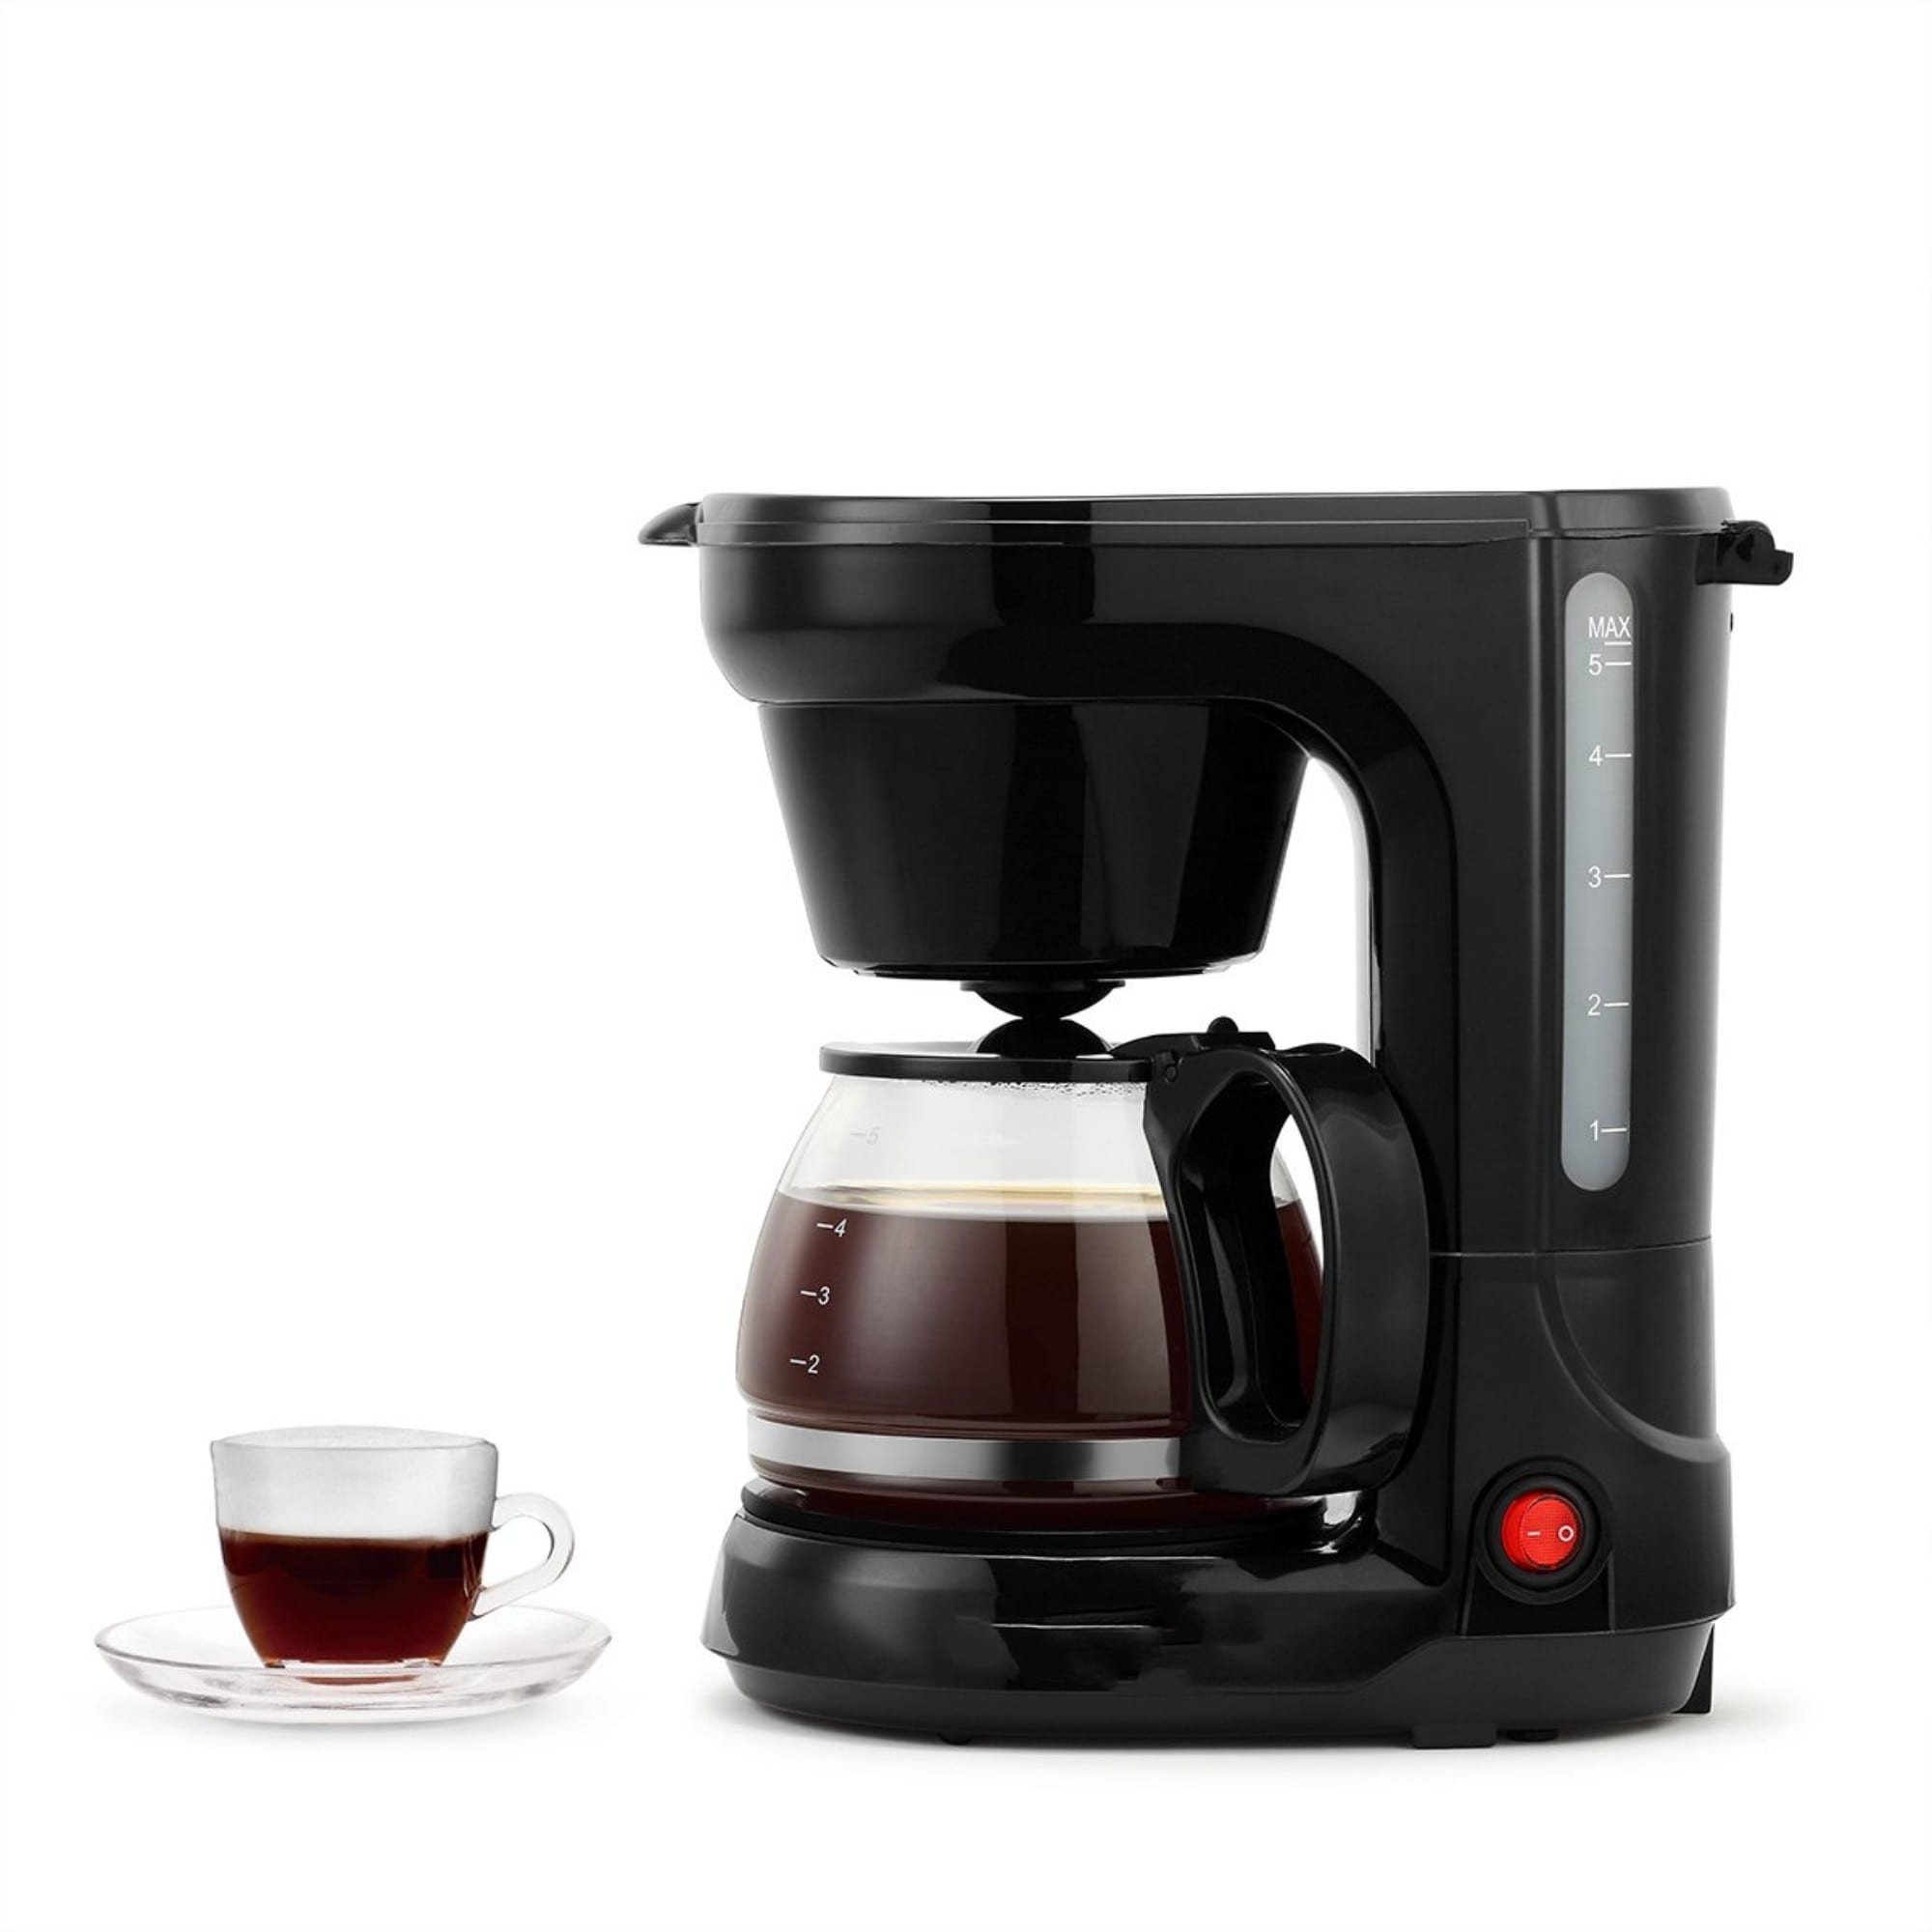 https://ak1.ostkcdn.com/images/products/is/images/direct/92cdacf7d33c53a619da82af106cf29f3ca5126e/5CUP-Coffee-Maker---Space-Saving-Design%2C-Auto-Pause-and-Serve%2C-Removable-Filter-Basket%2C-BLACK.jpg